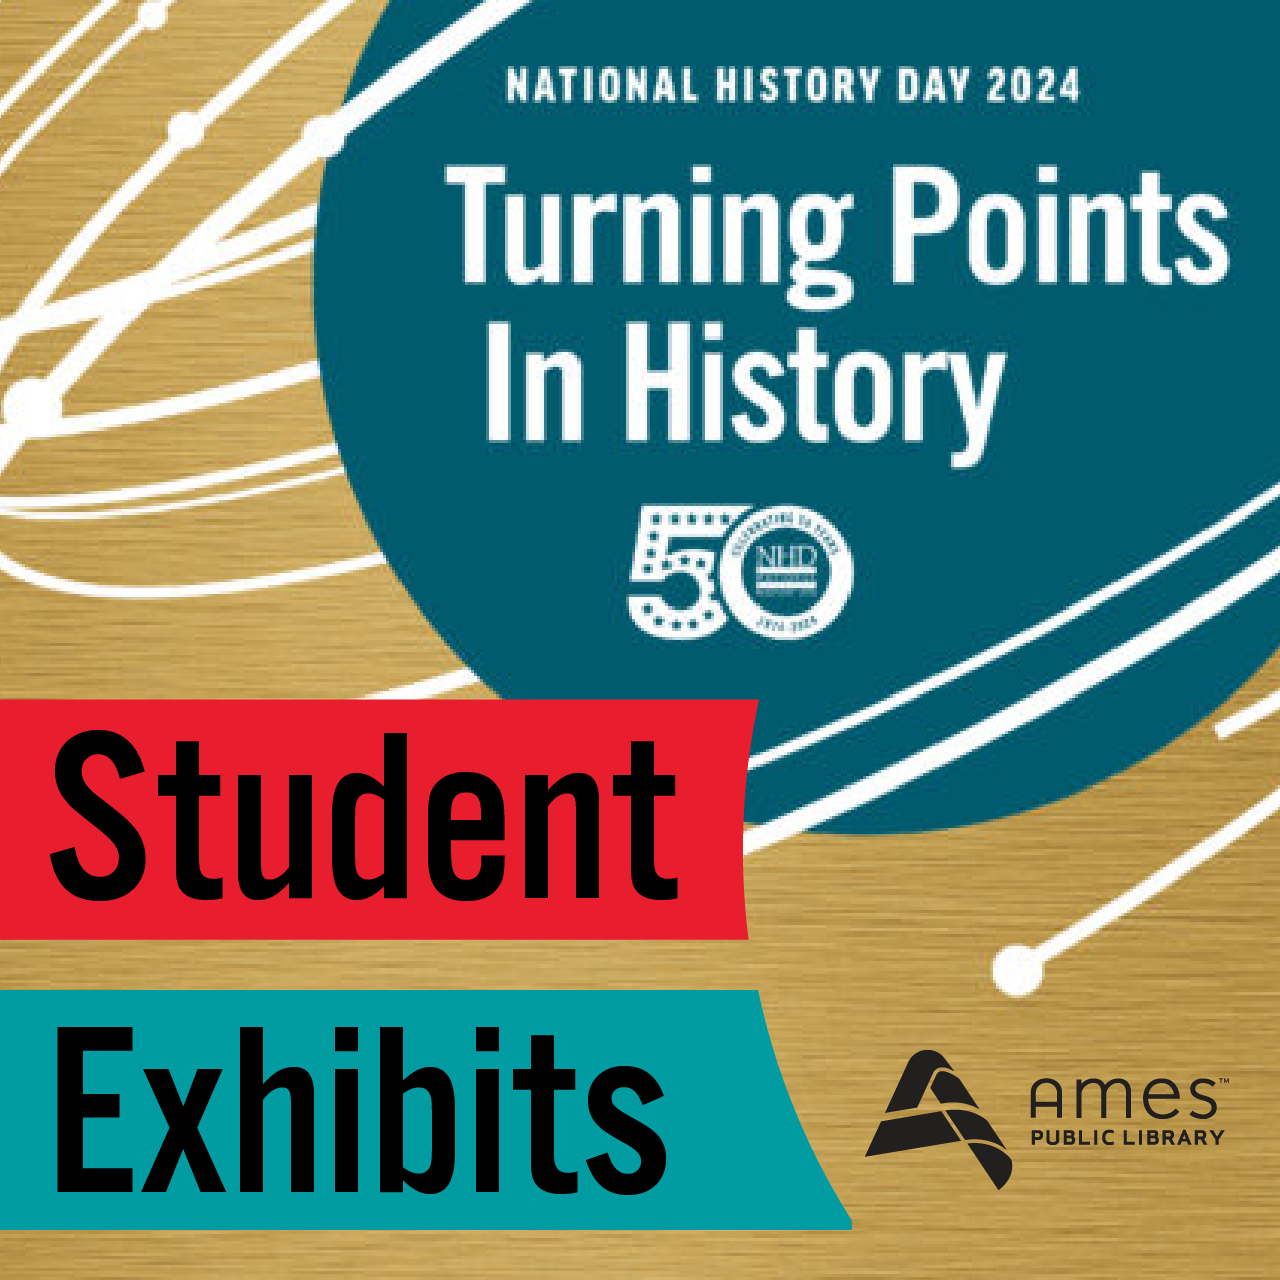 Student Exhibits, National History Day 2024, Turning Points in History